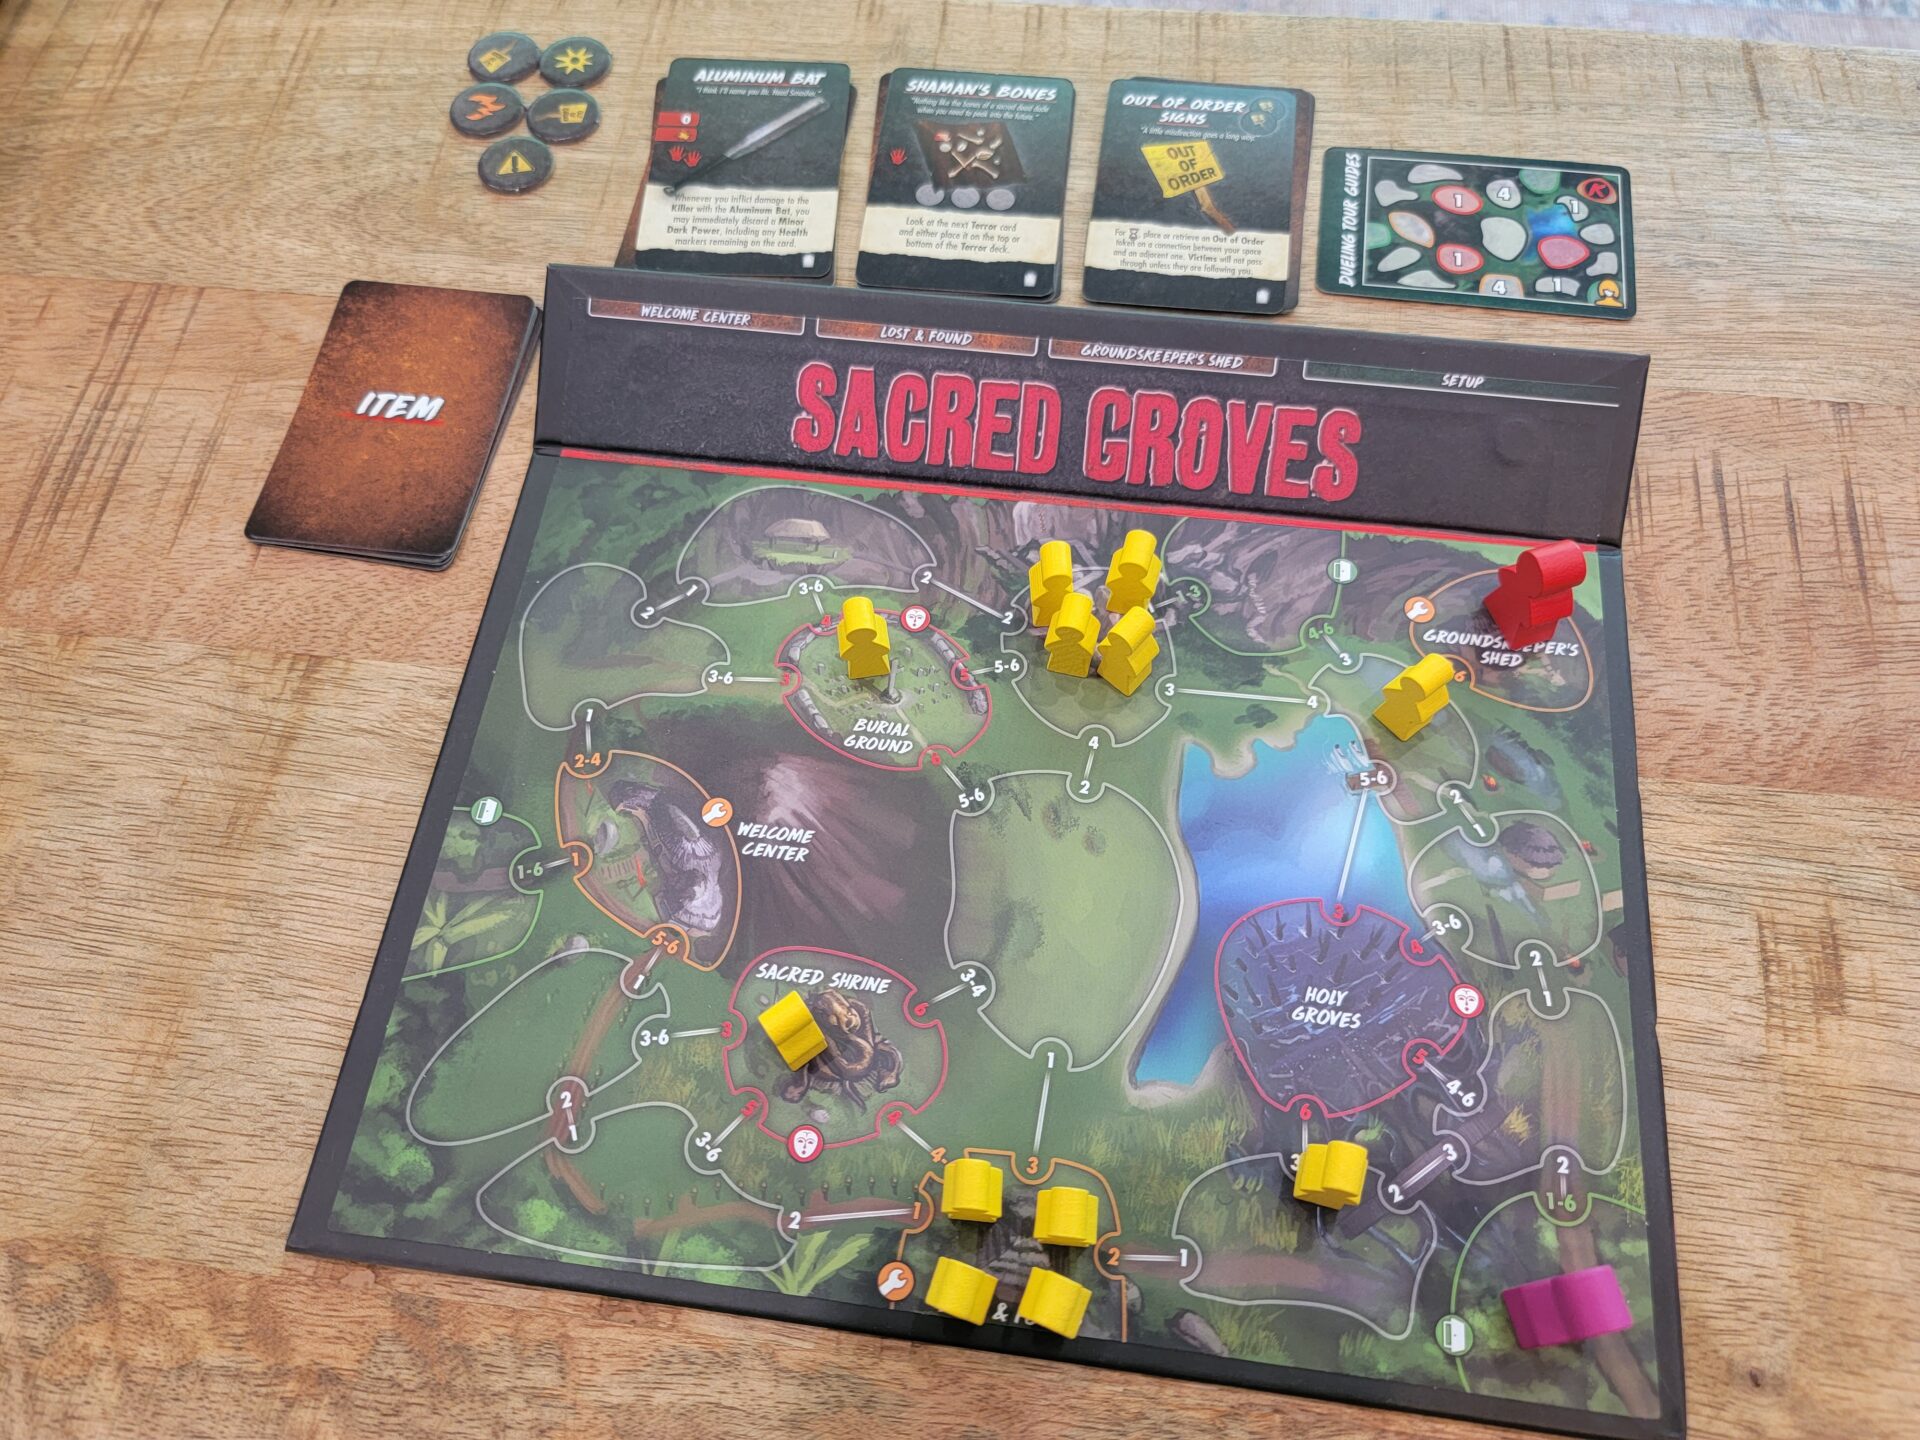 Final Girl – Slaughter in the Groves board game.